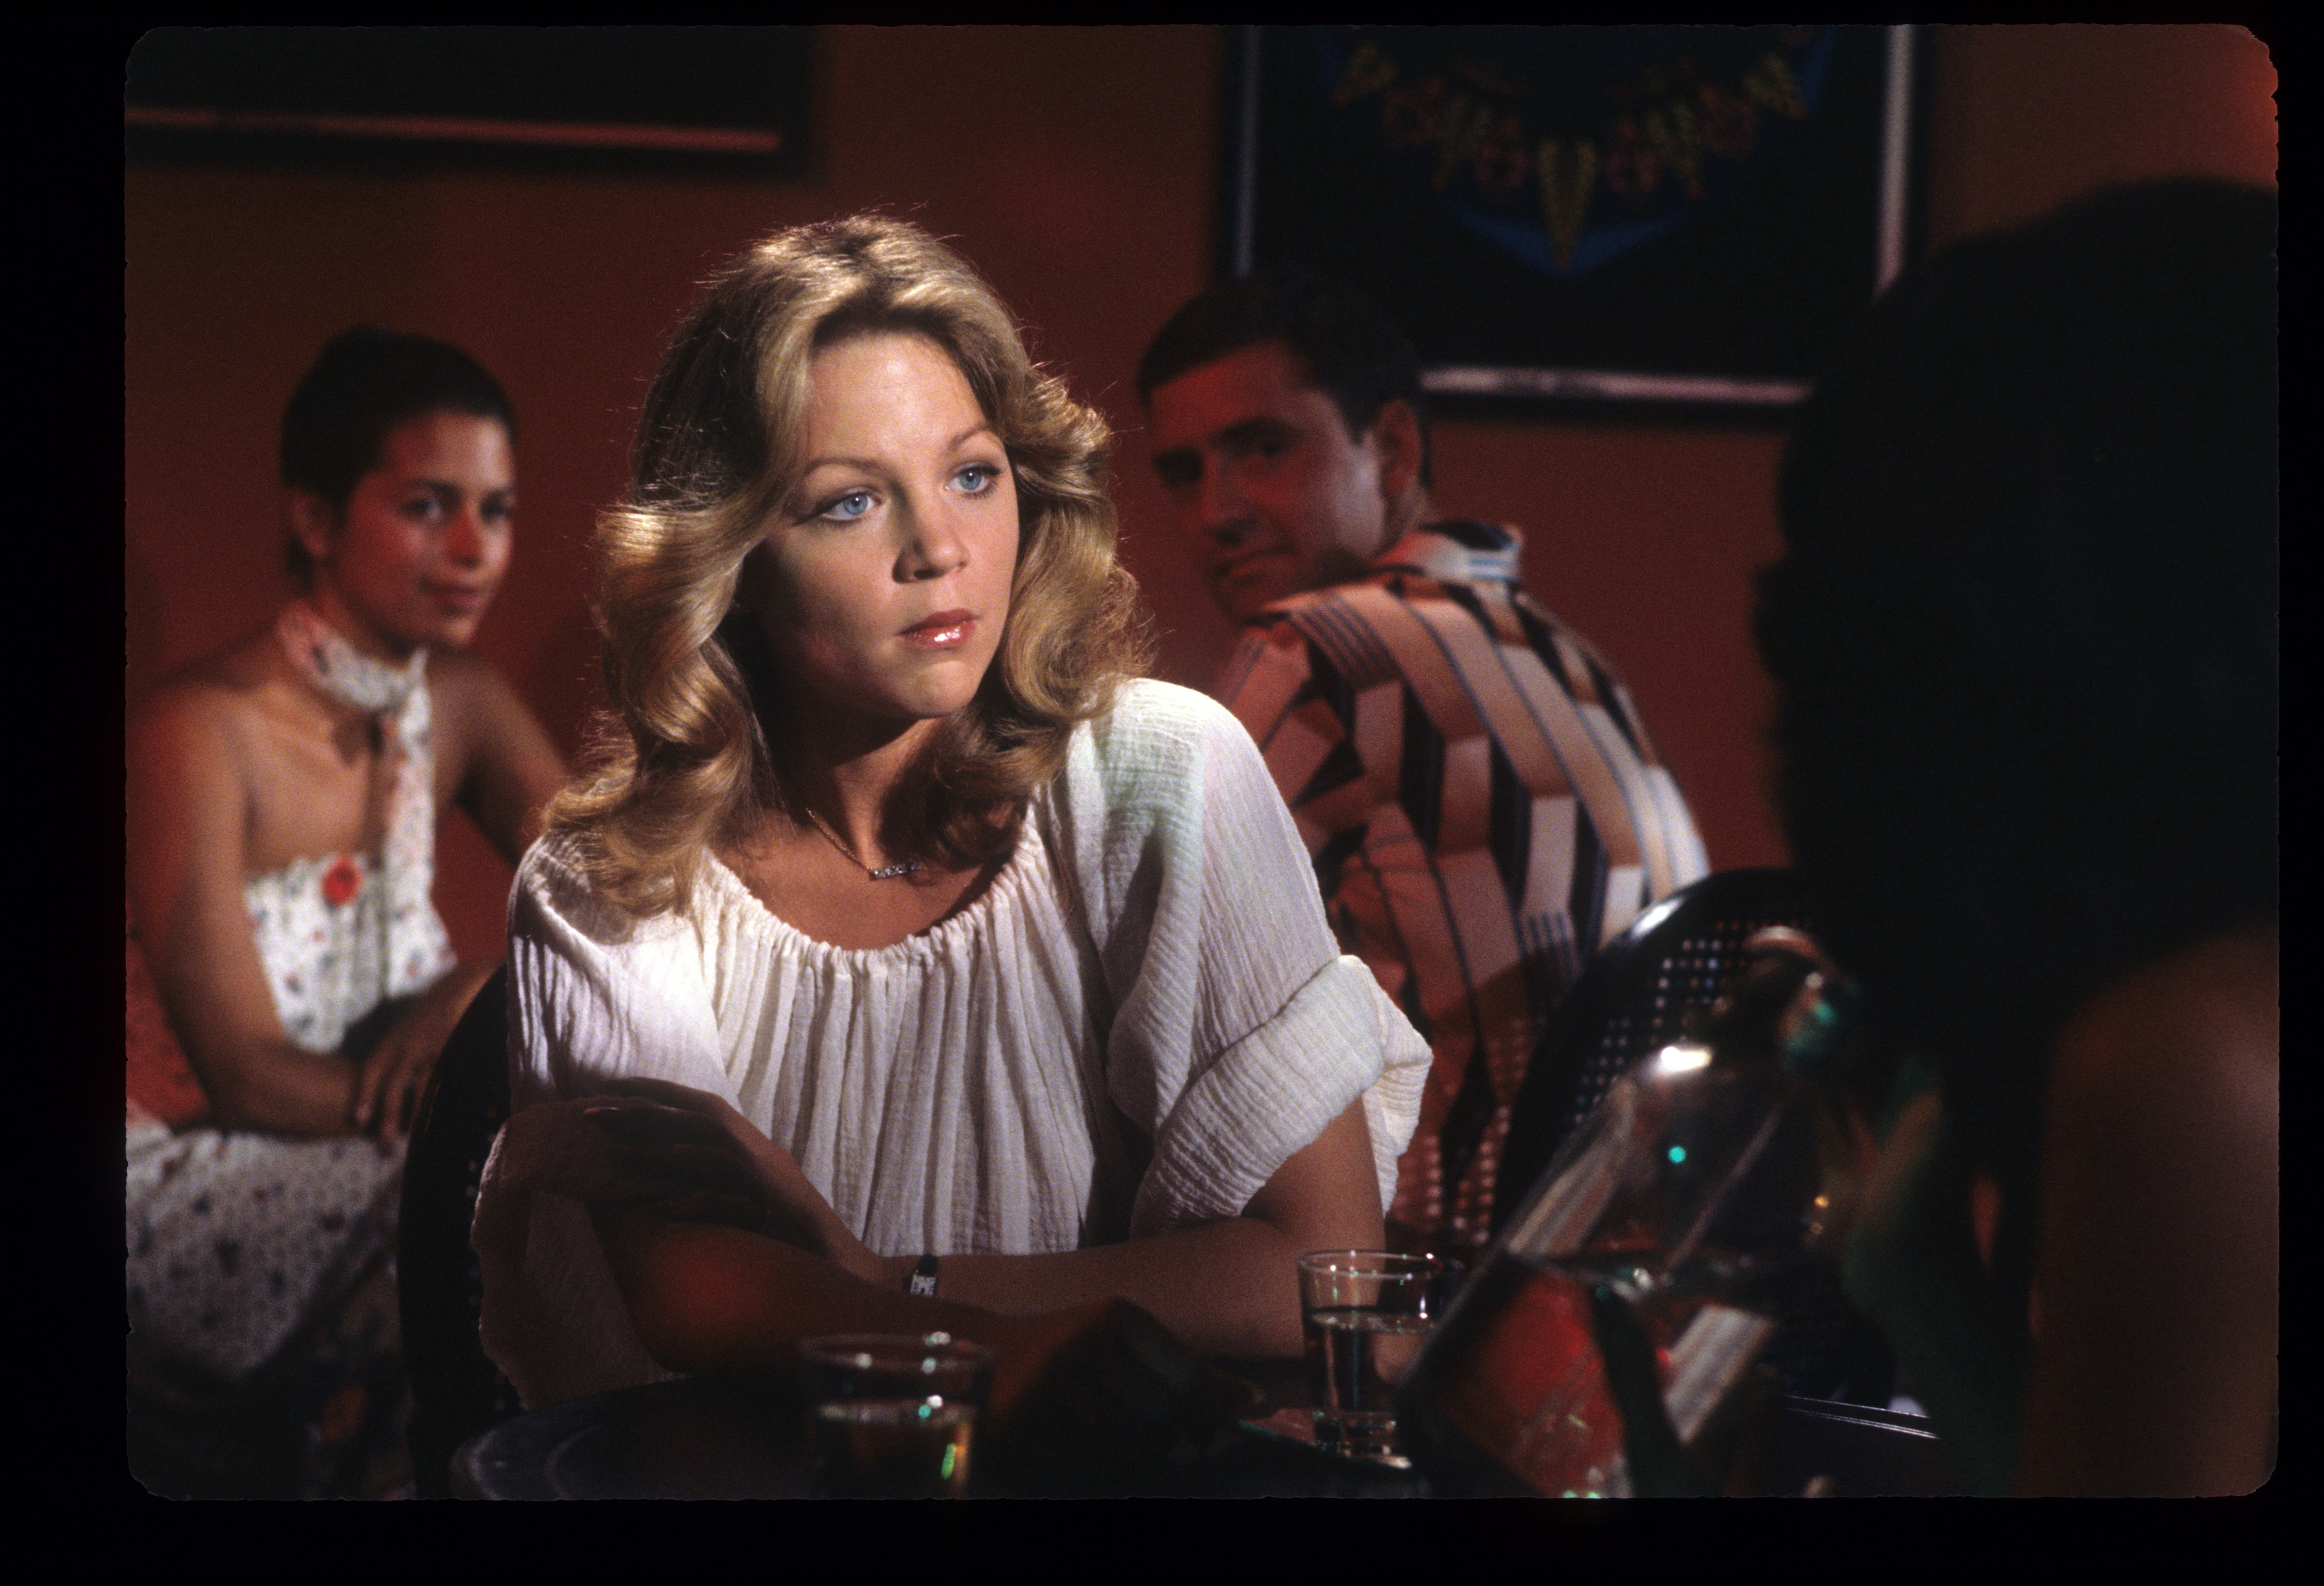 Lisa Hartman, wearing a white blouse and leaning against a bar, in 'Tabitha'